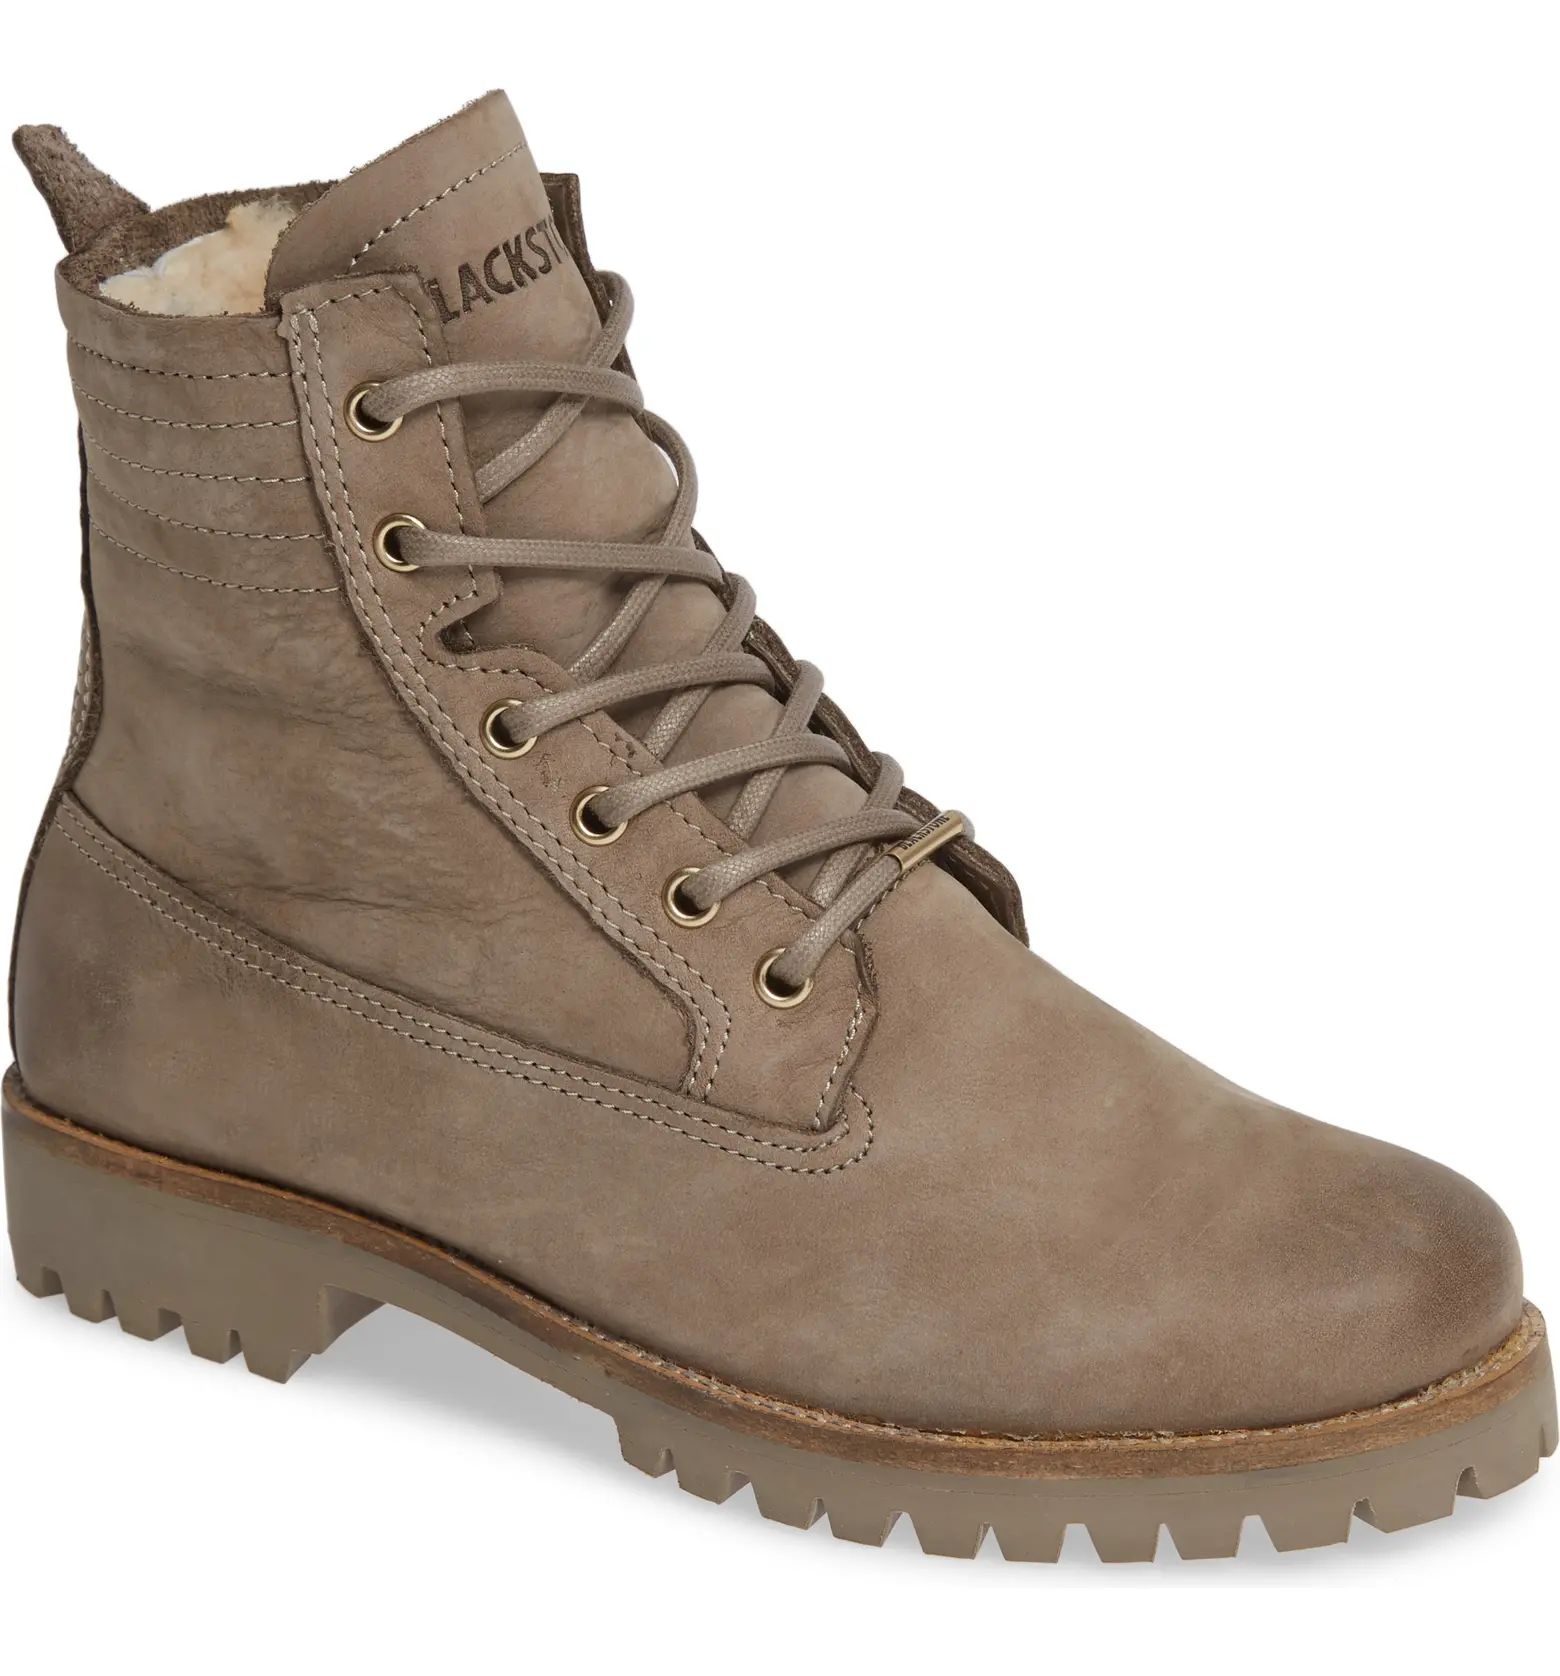 OL22 Lace-Up Boot with Genuine Shearling Lining | Nordstrom